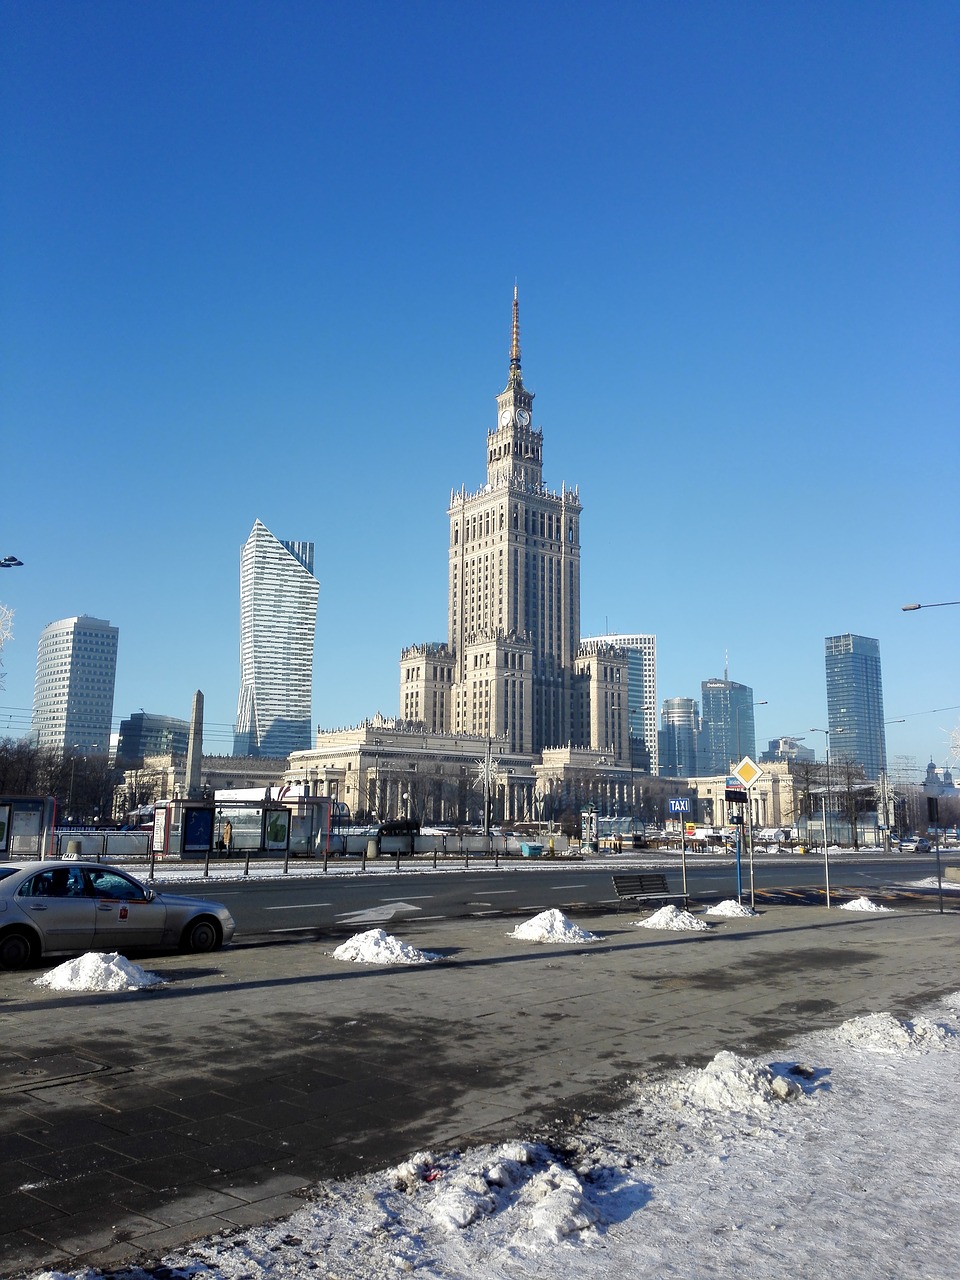 cialis warsaw palace of culture and science free photo